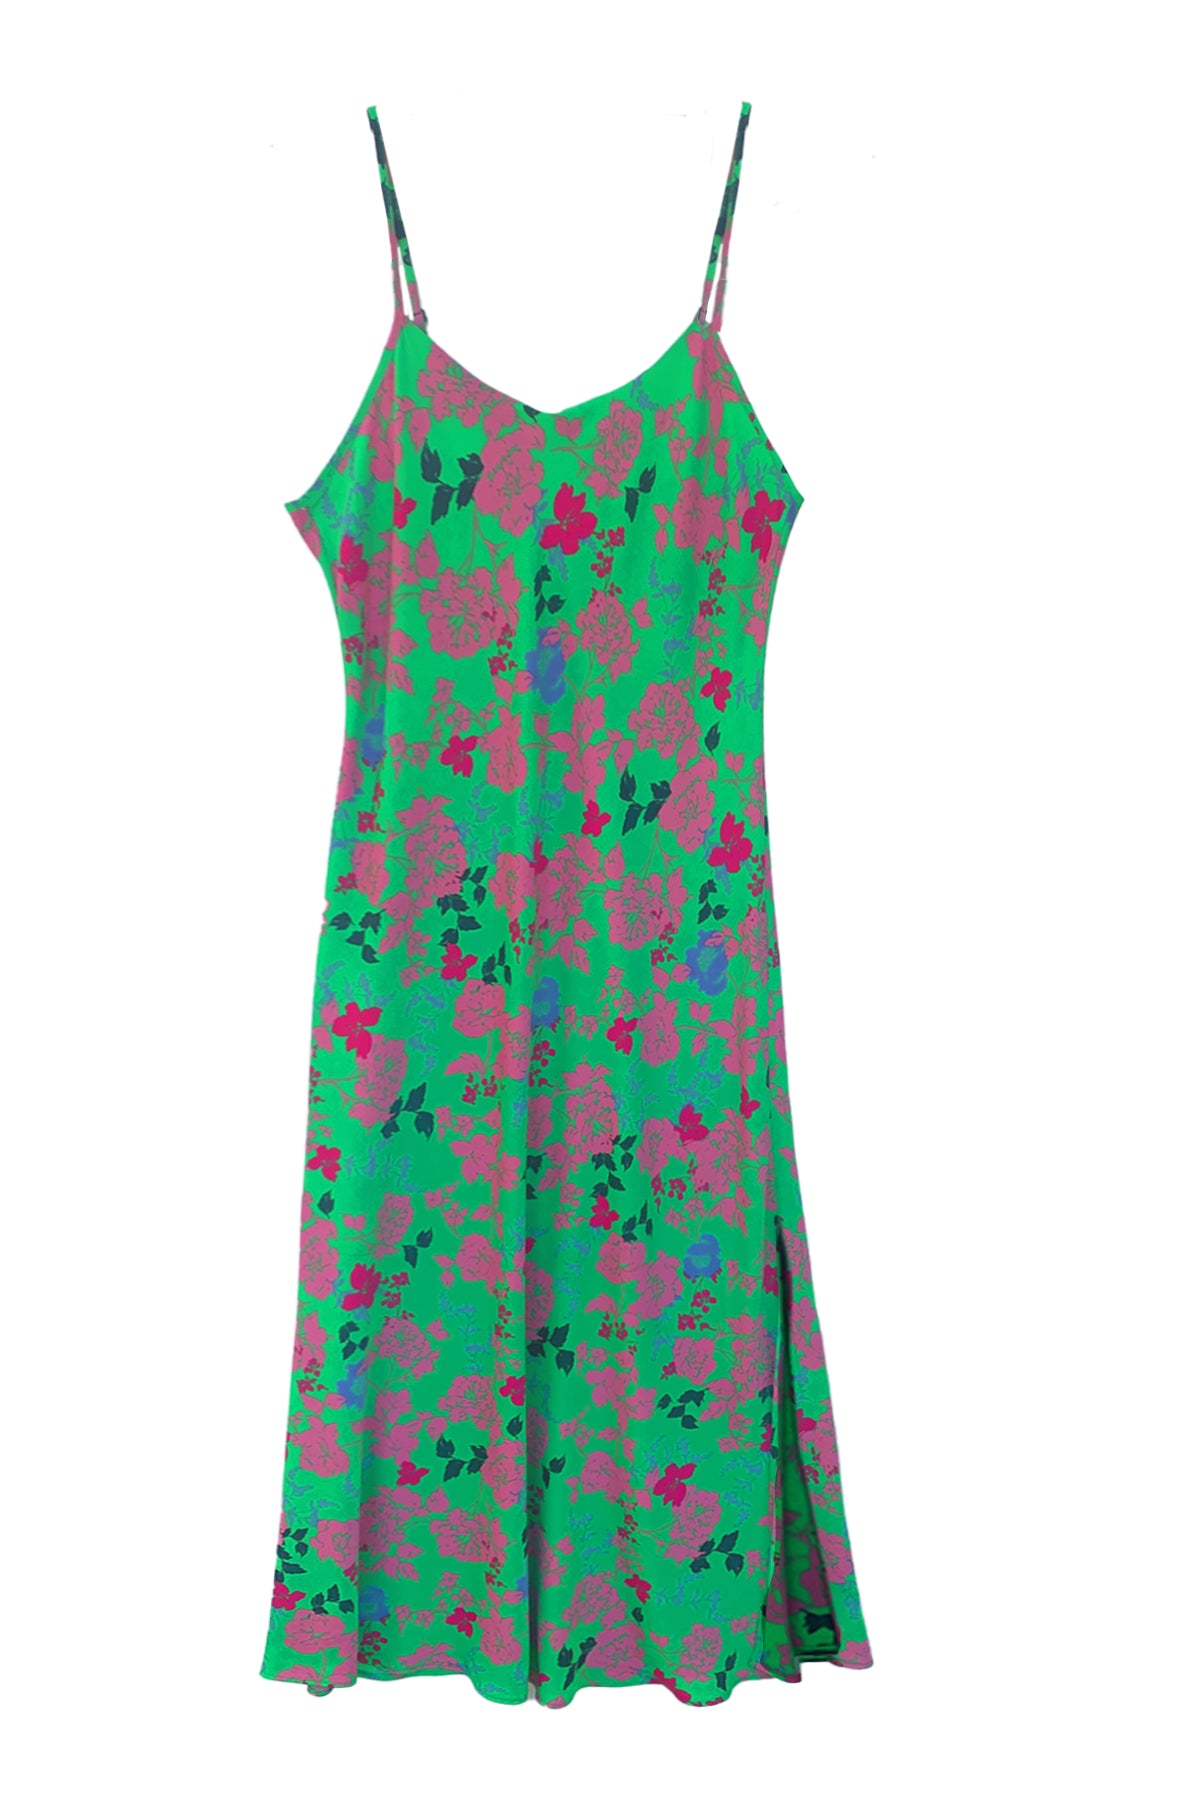 flat of the green floral leah dress